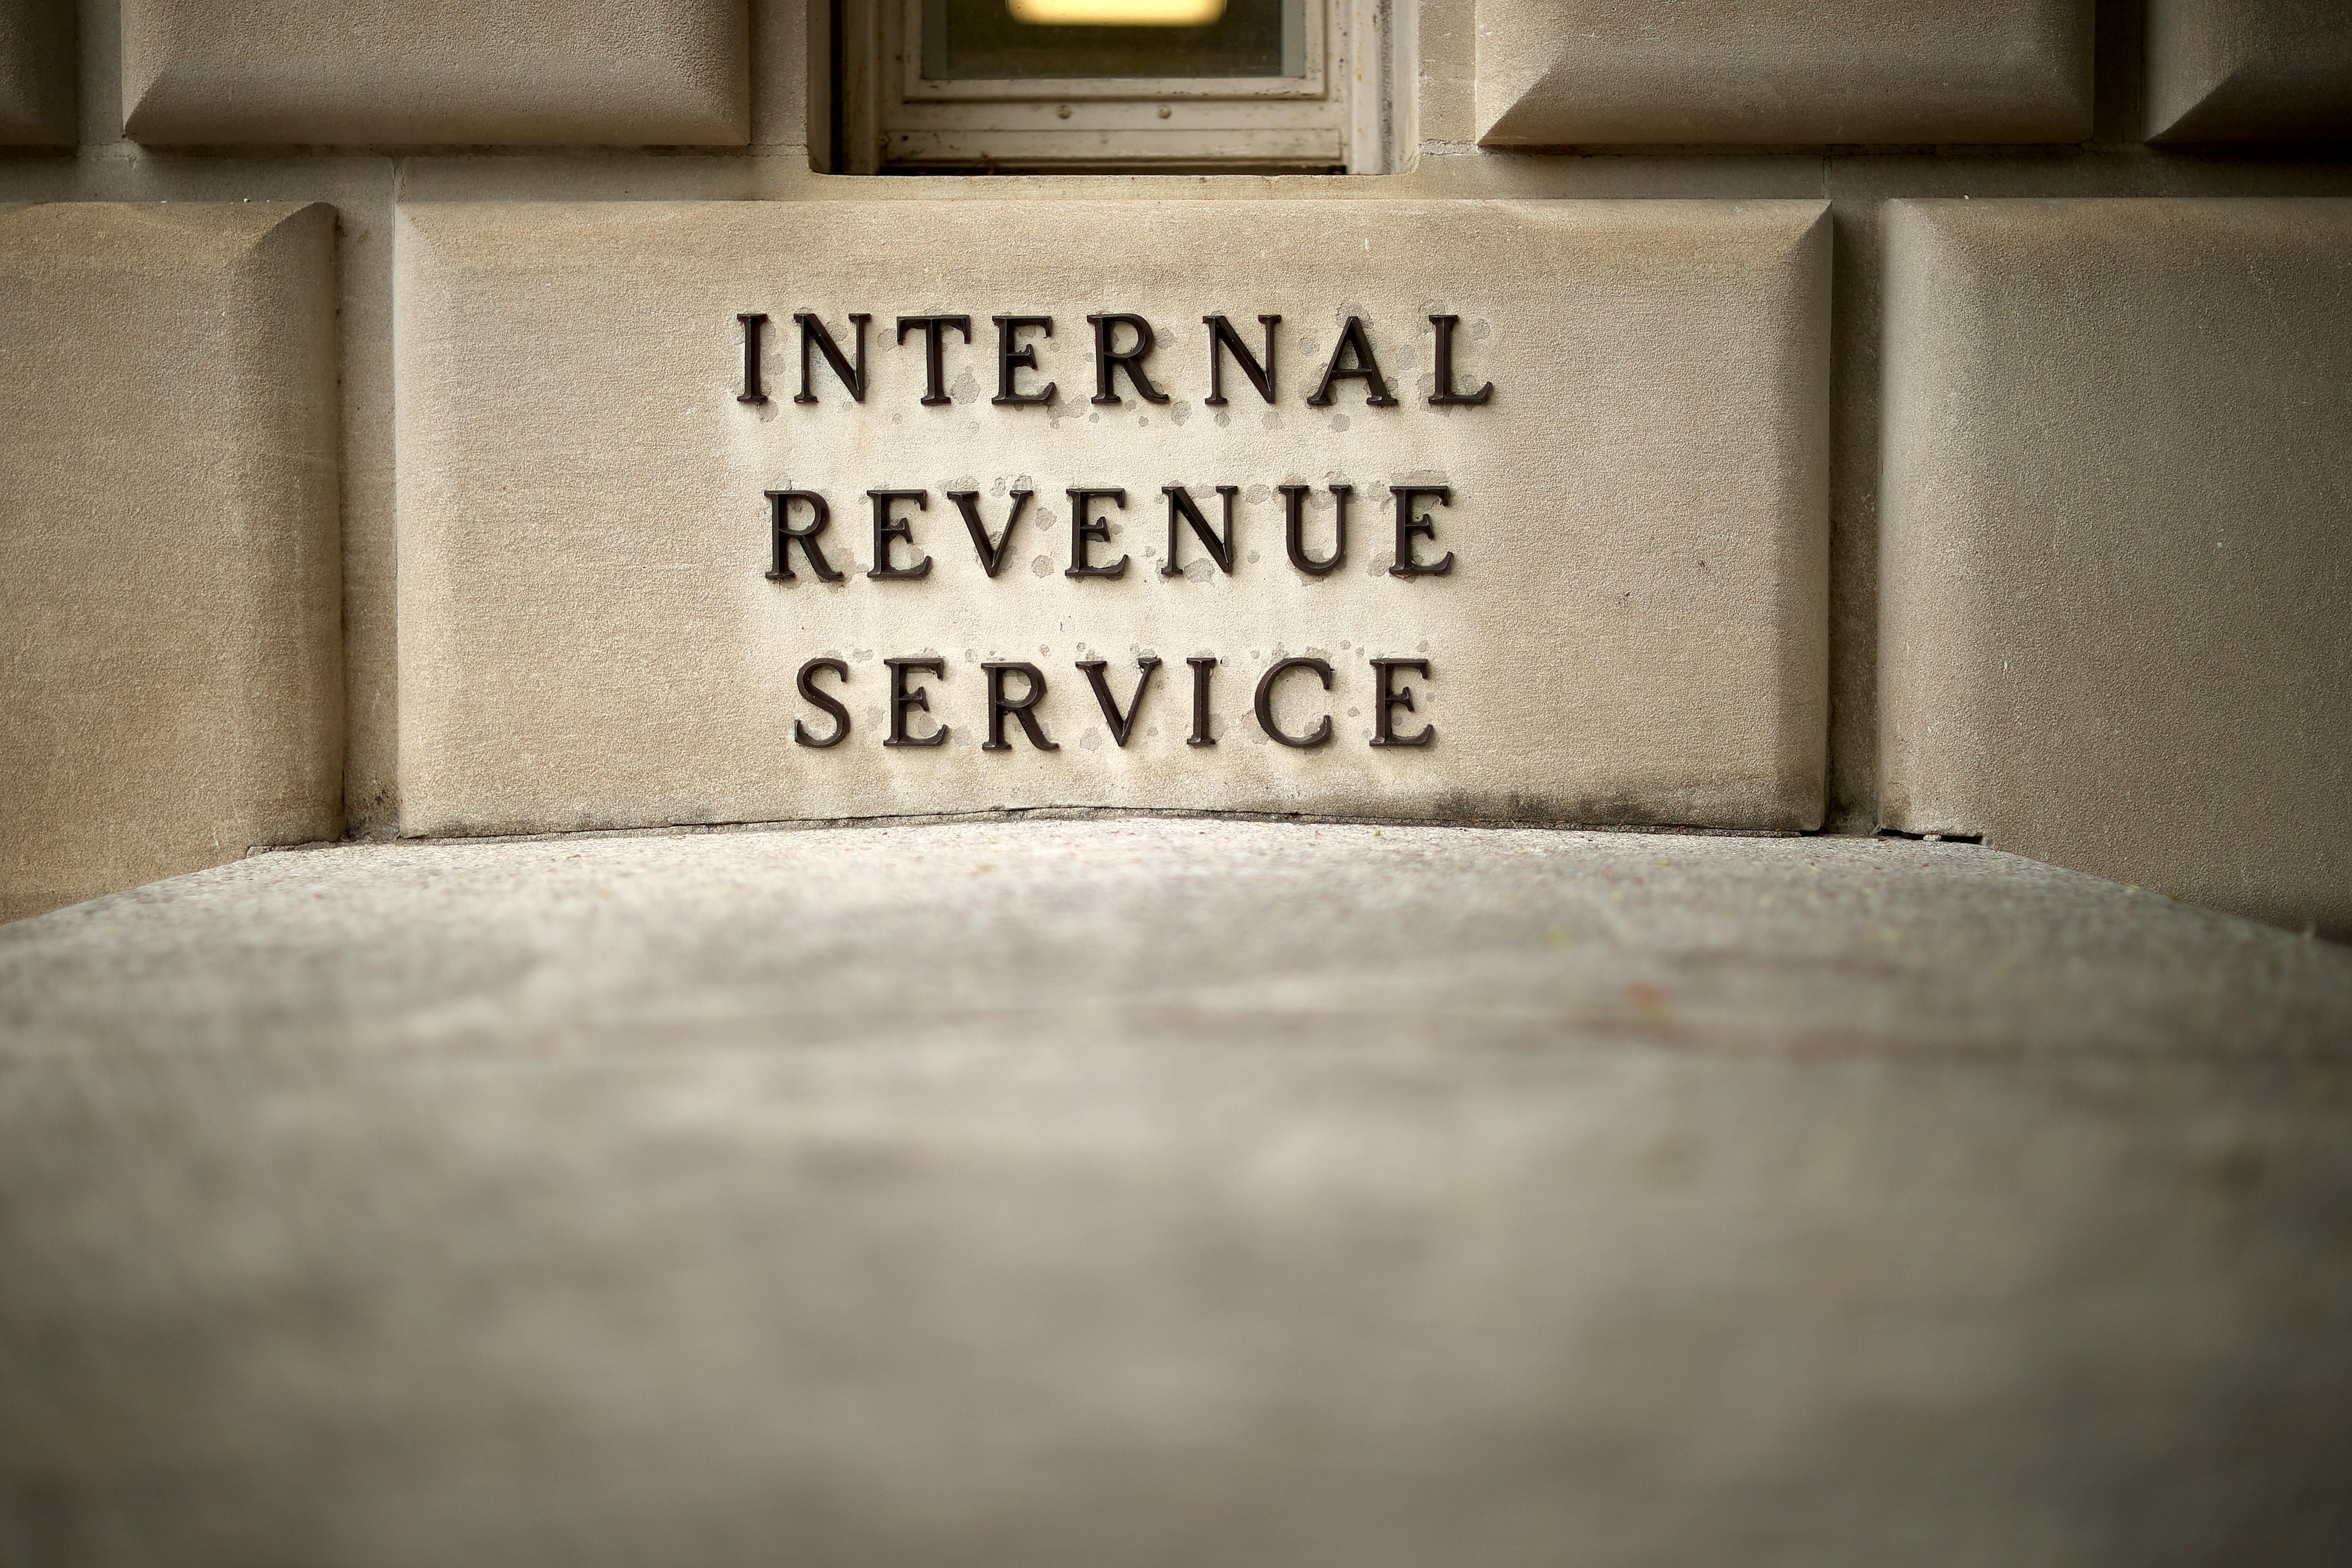 A brick on the exterior of the IRS building in Washington reads "Internal Revenue Service"